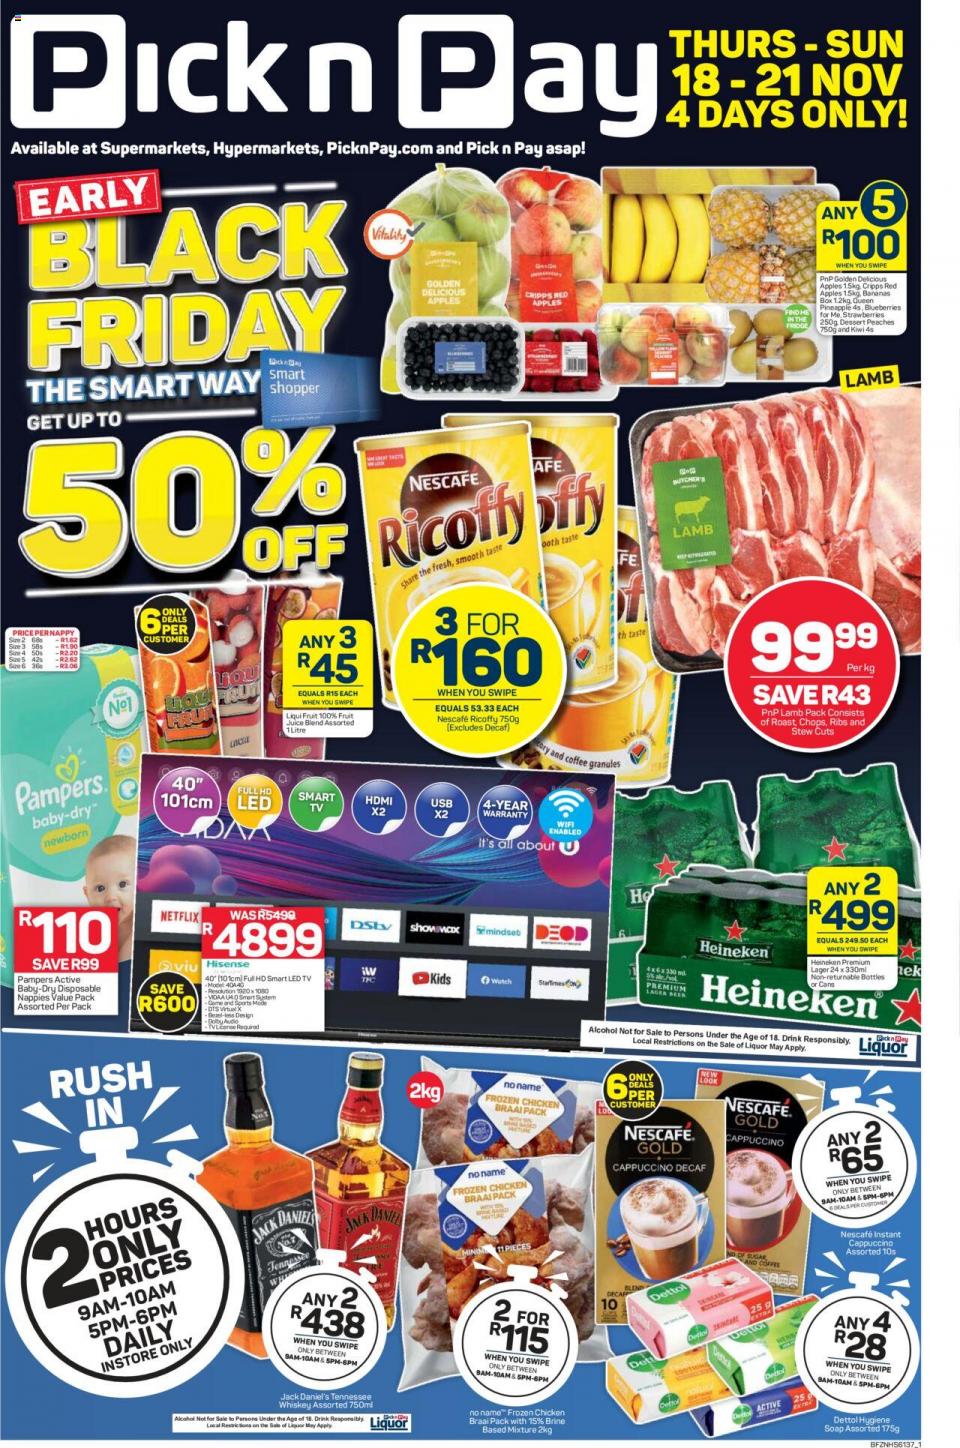 Pick n Pay Specials Early-Black Friday 18 – 21 Nov 2021